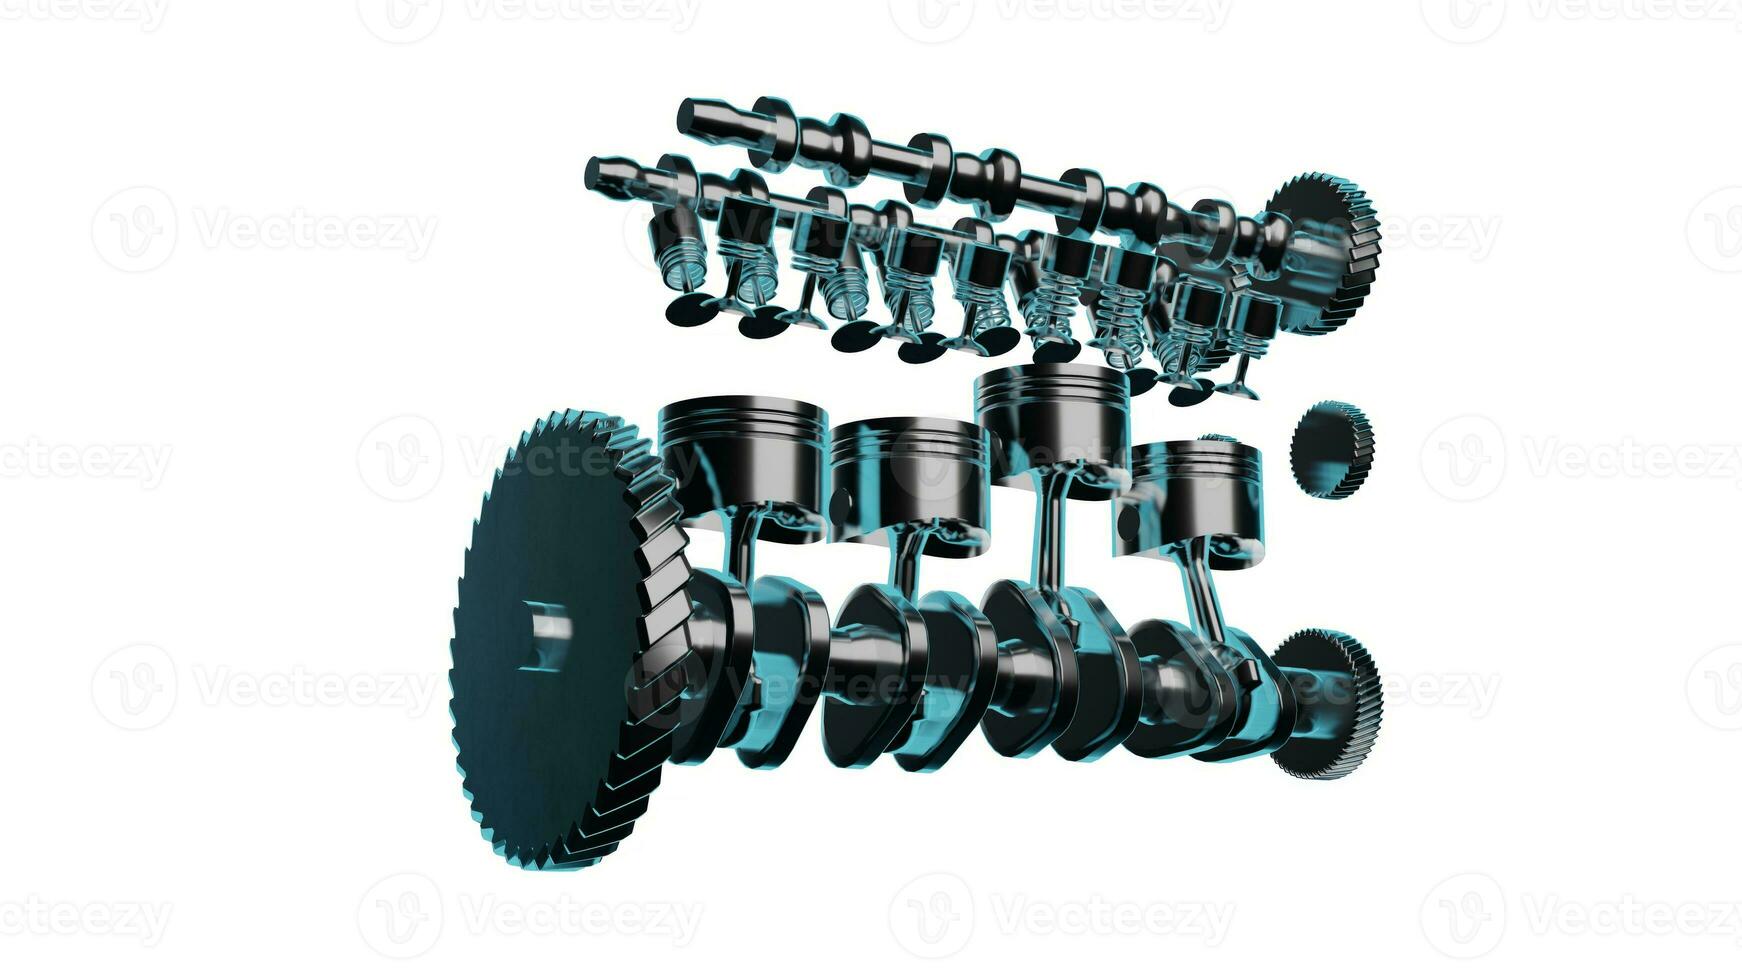 3D rendering of titanium alloy car engine isolated on white background. Premium vehicle component cylinders with crankshaft made with precise masterful engineering to be used on automobiles photo